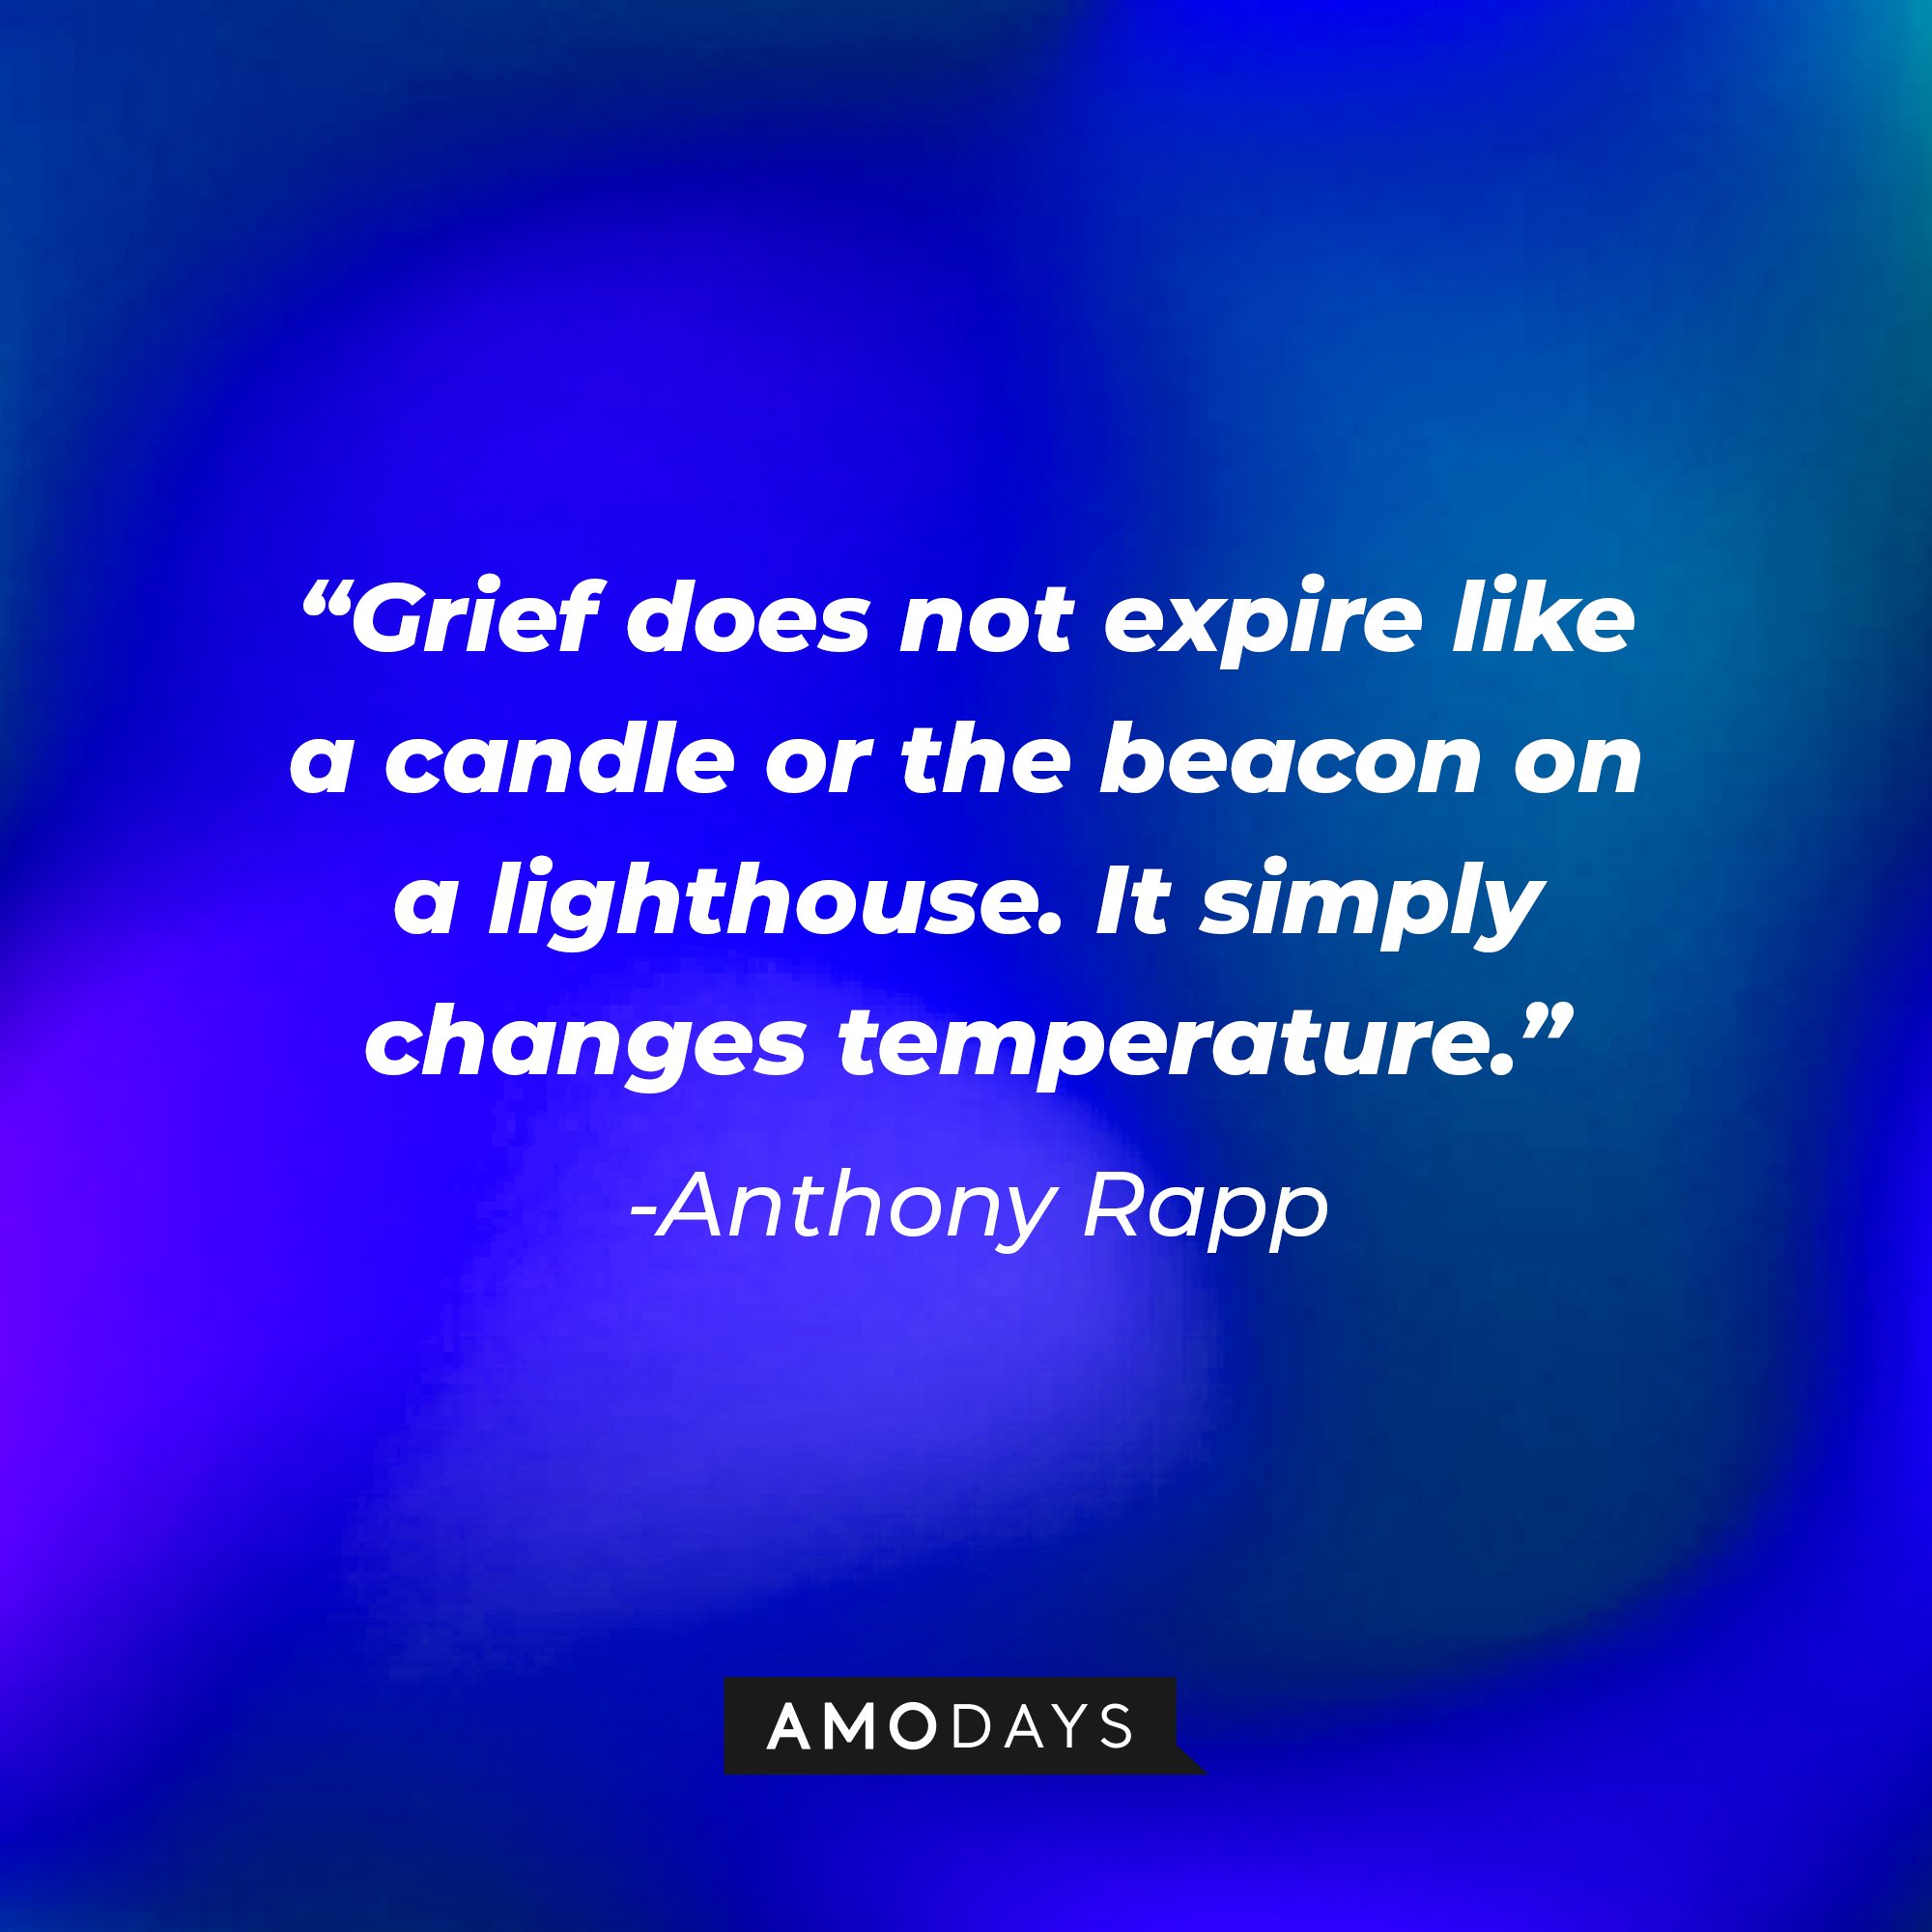 Anthony Rapp’s quote: “Grief does not expire like a candle or the beacon on a lighthouse. It simply changes temperature.” | Image: AmoDays